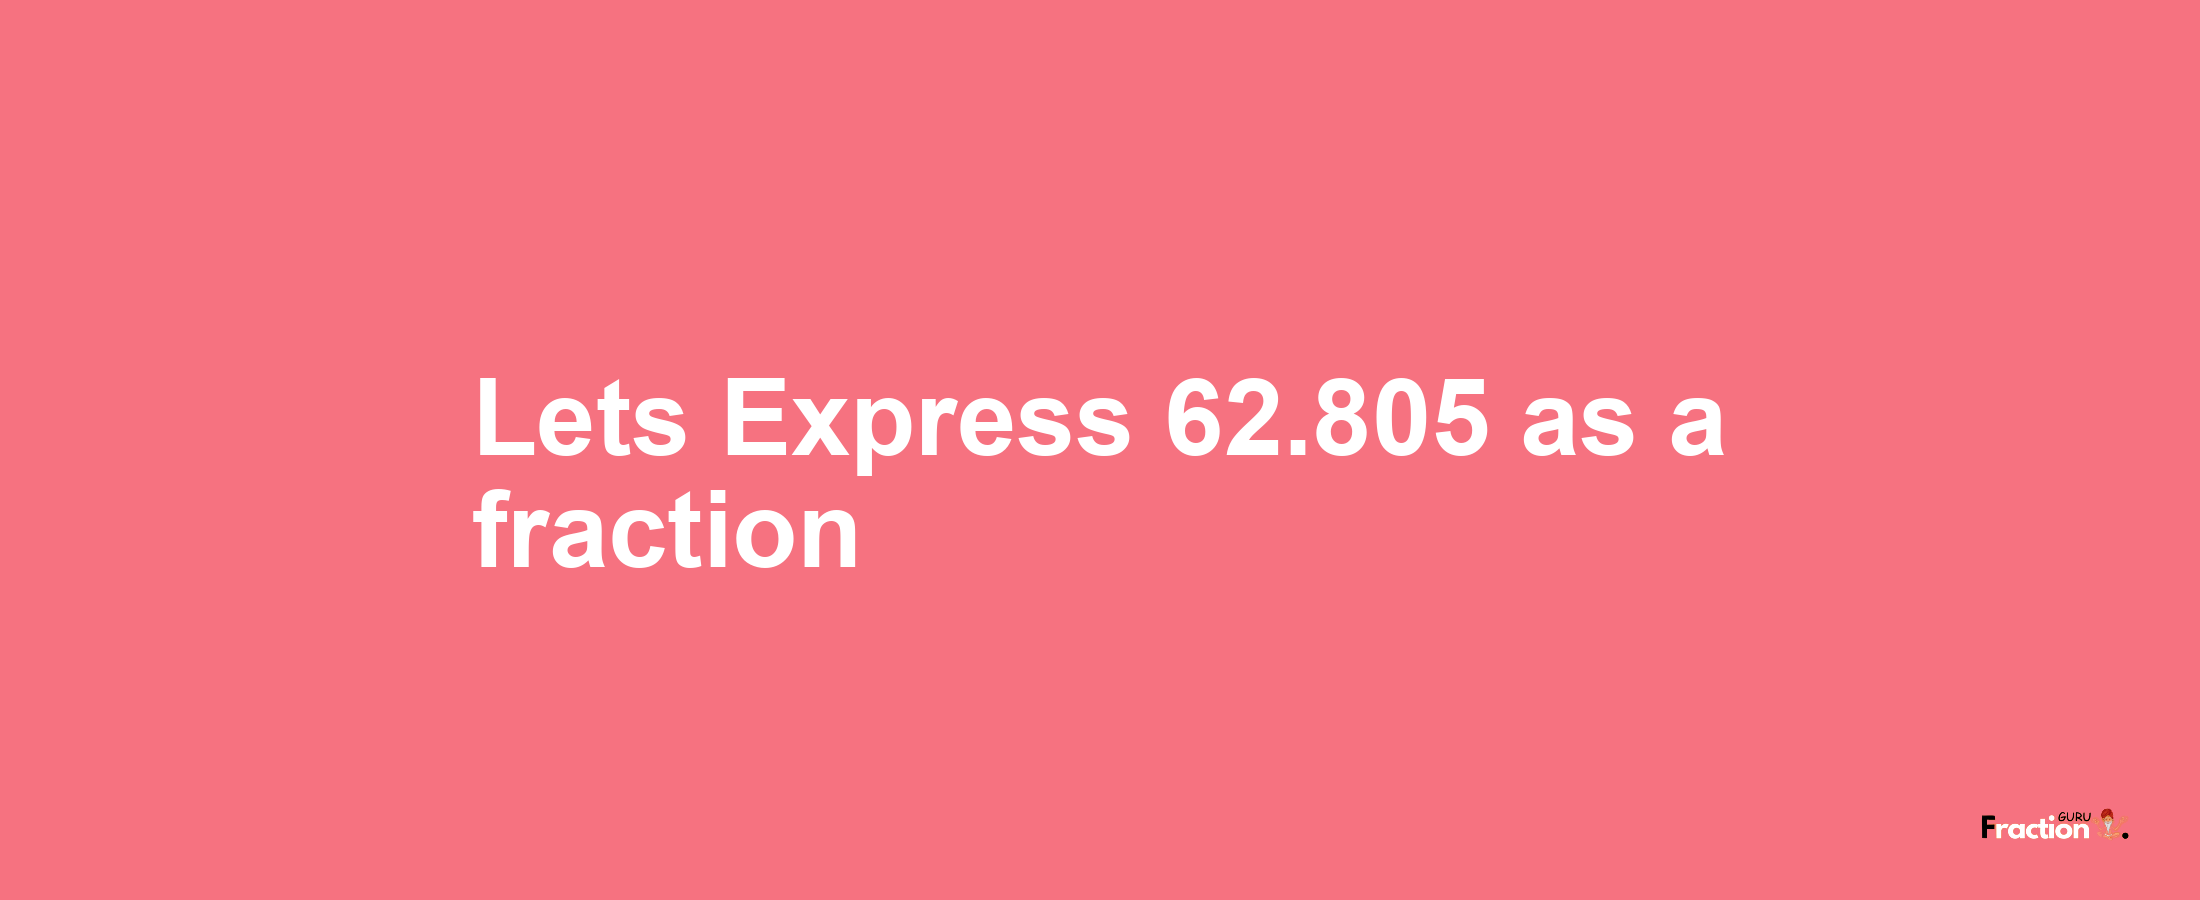 Lets Express 62.805 as afraction